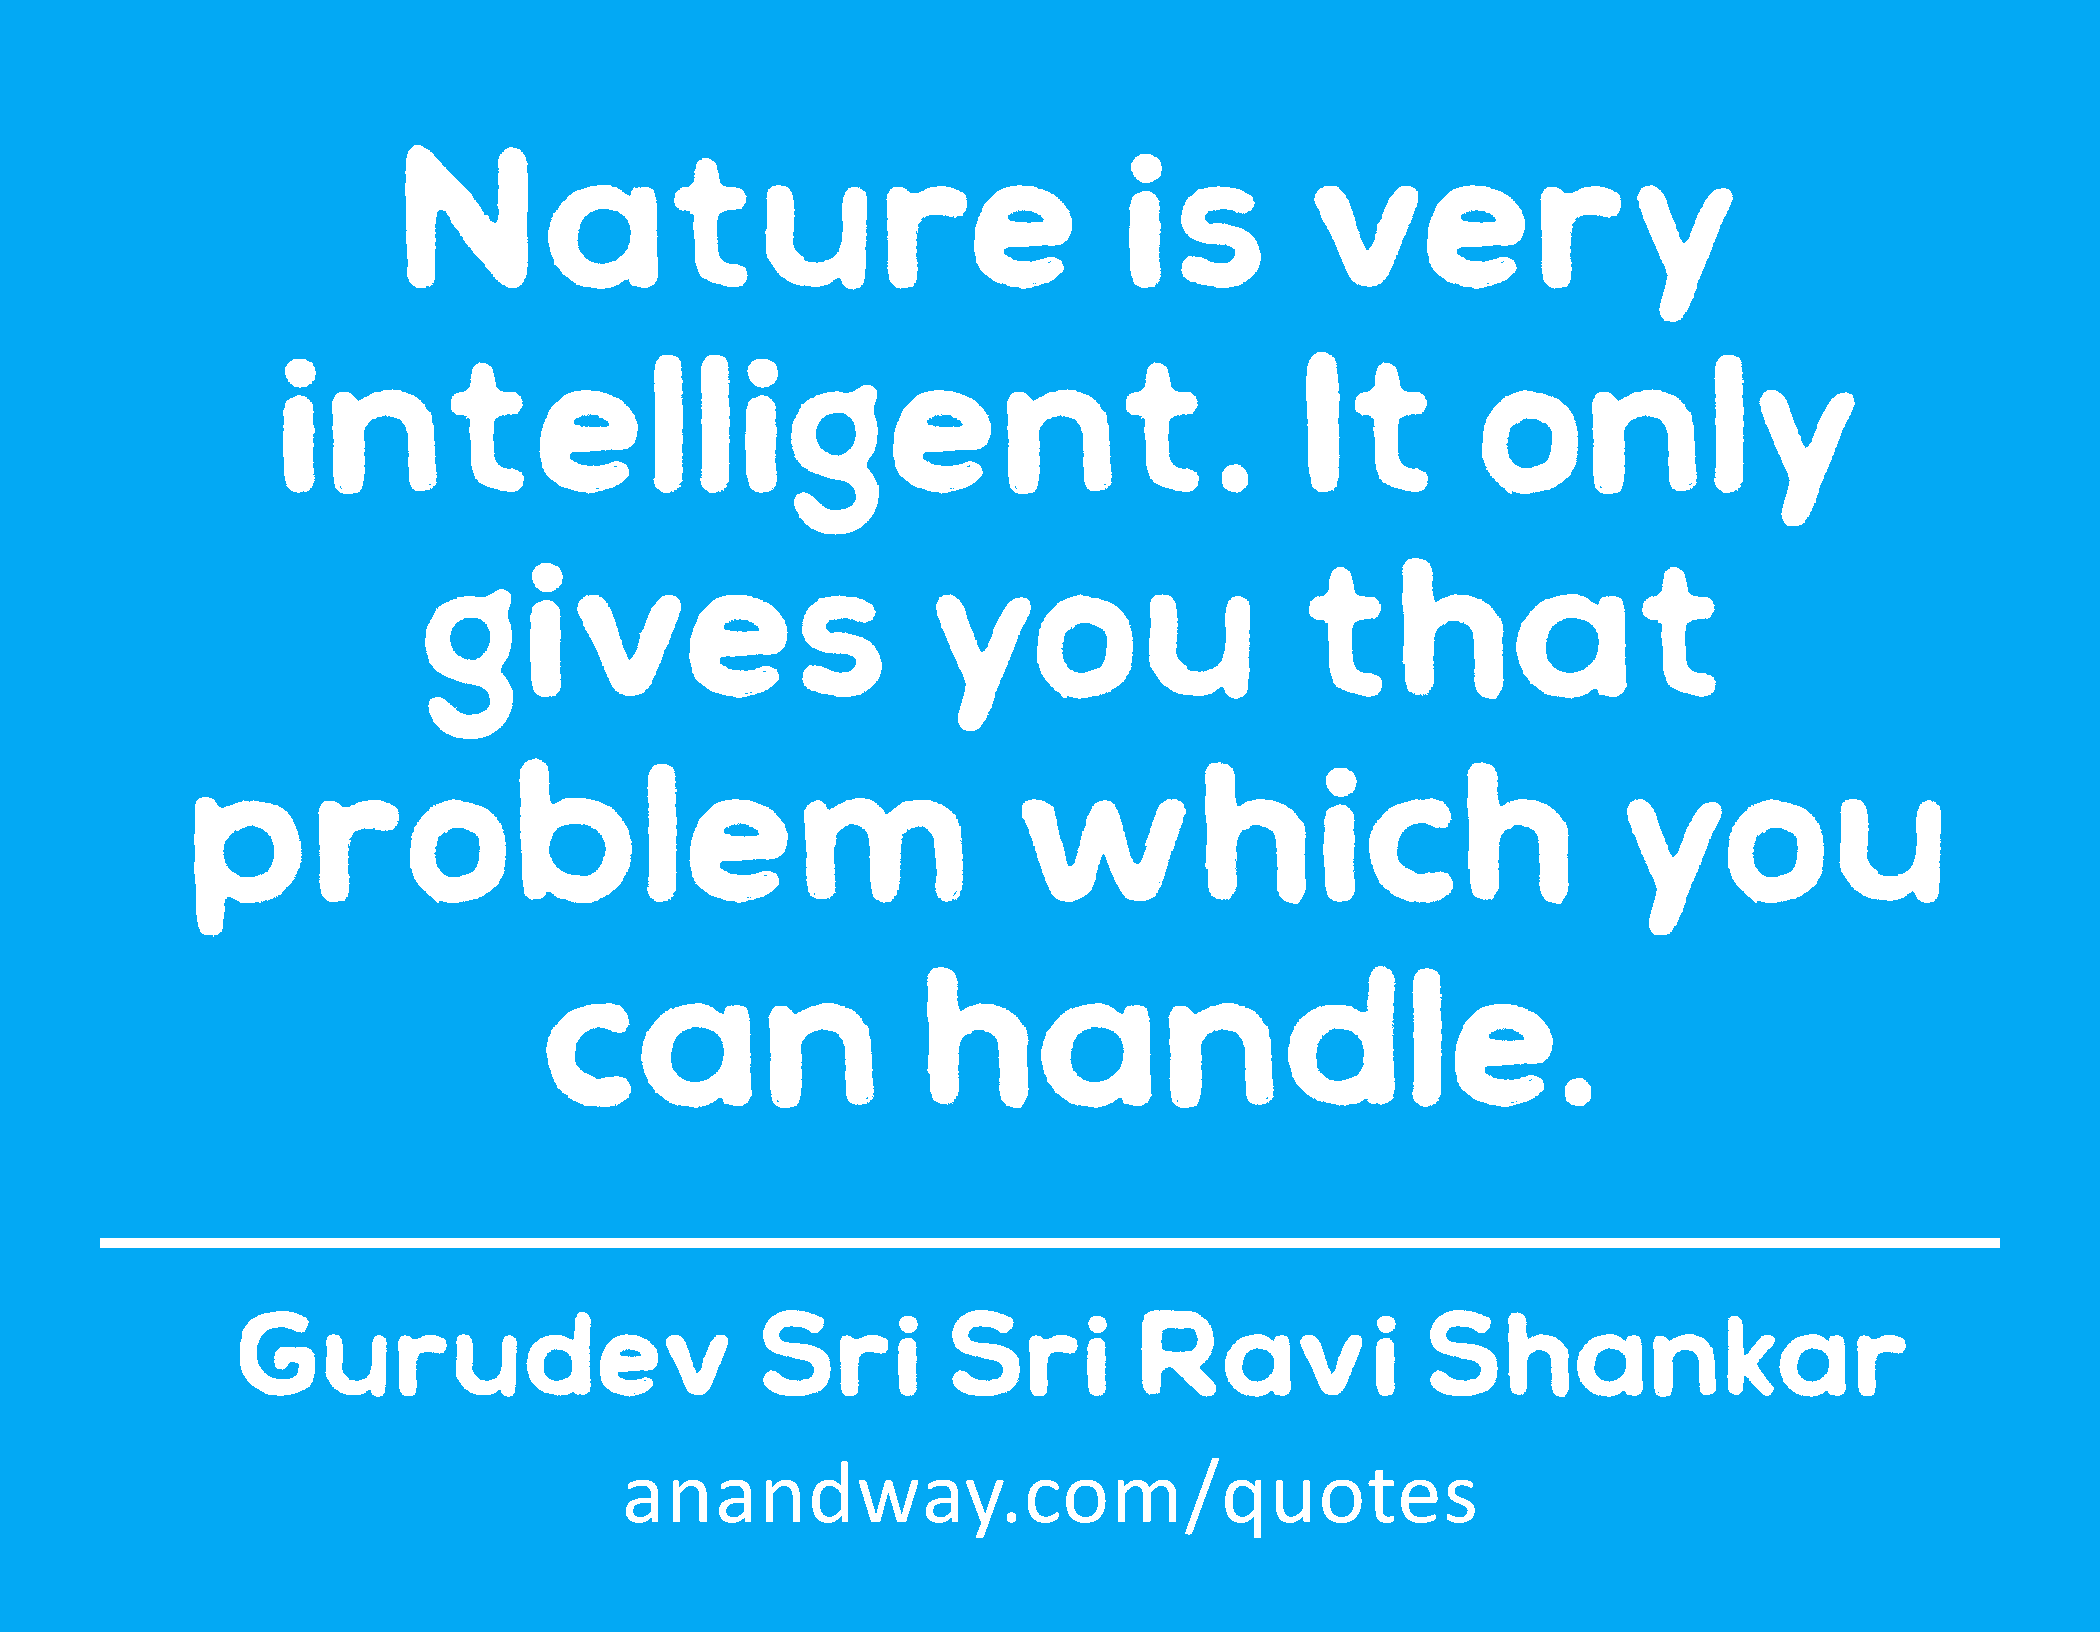 Nature is very intelligent. It only gives you that problem which you can handle. 
 -Gurudev Sri Sri Ravi Shankar